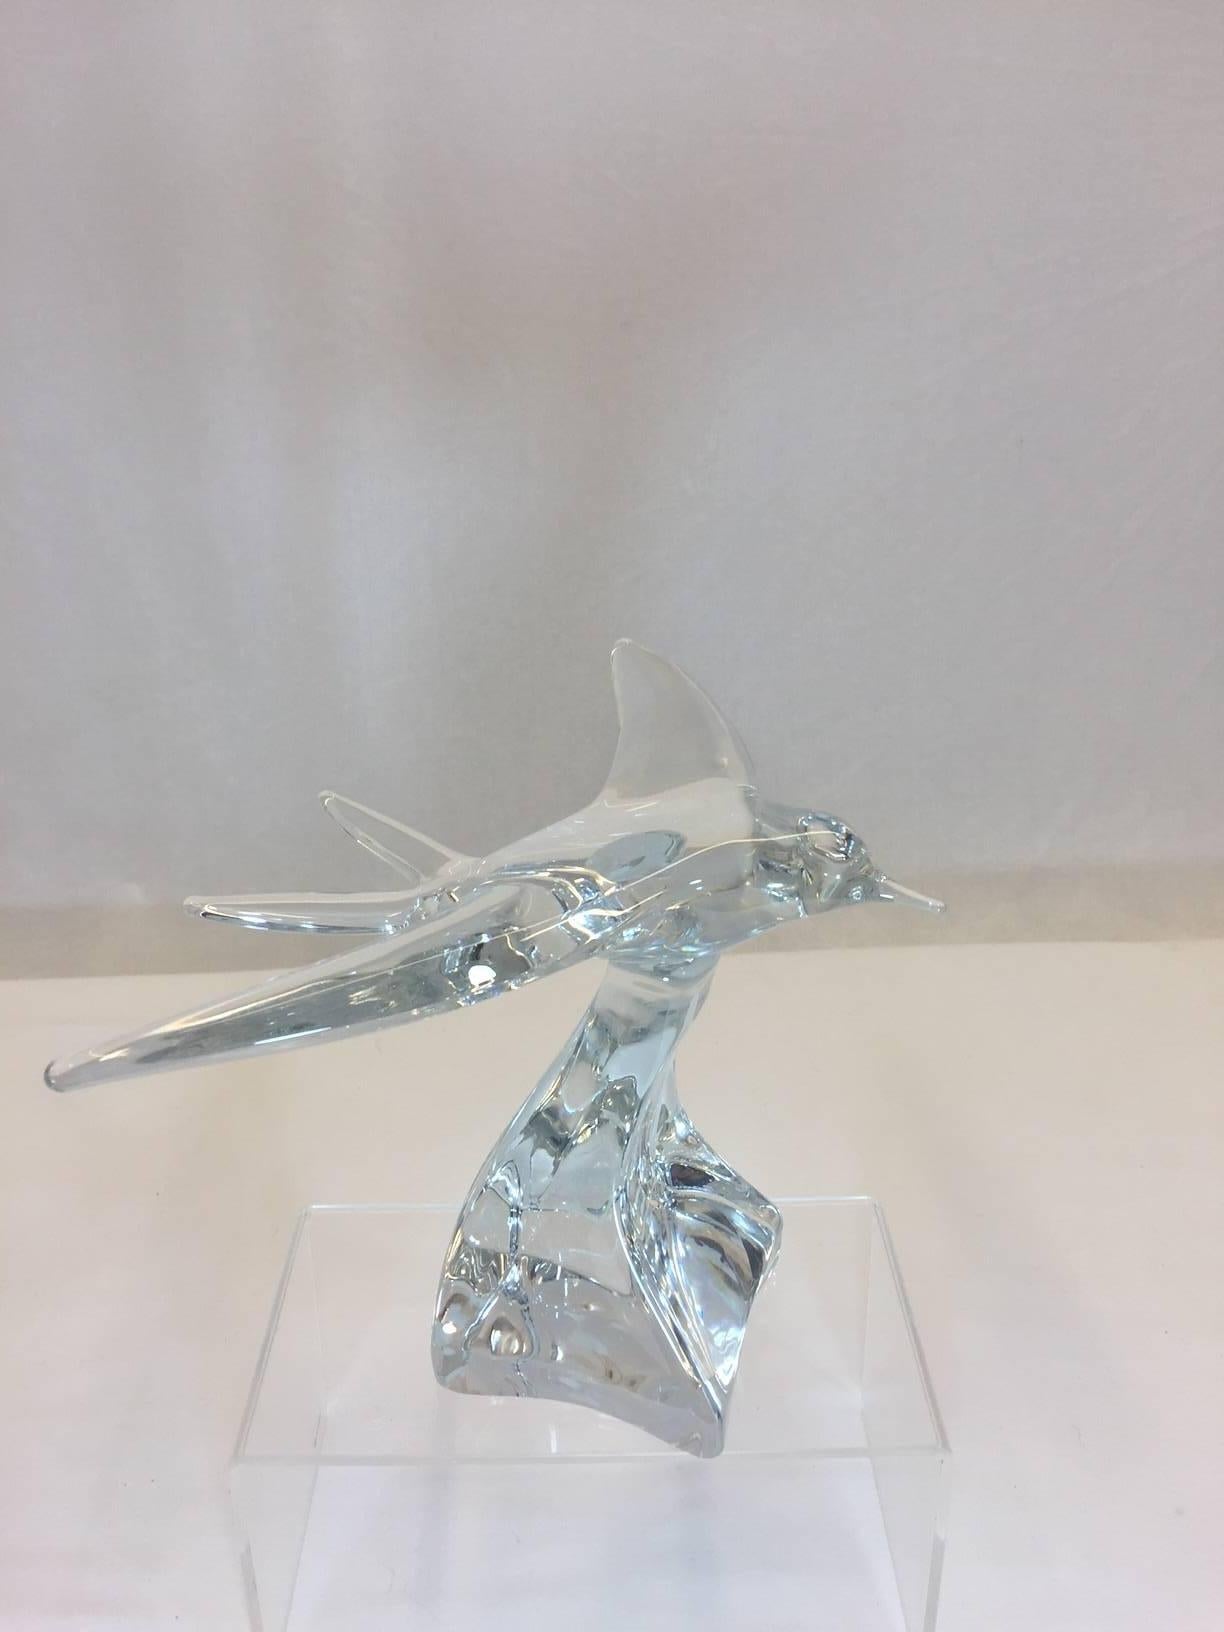 This beautiful Daum sculpture is signed with the Daum laser on the base. It is in excellent condition and perfect as part of your Daum bird collection, with other Daum crystal, or as a Stand-alone piece. Please see our other Daum listings.